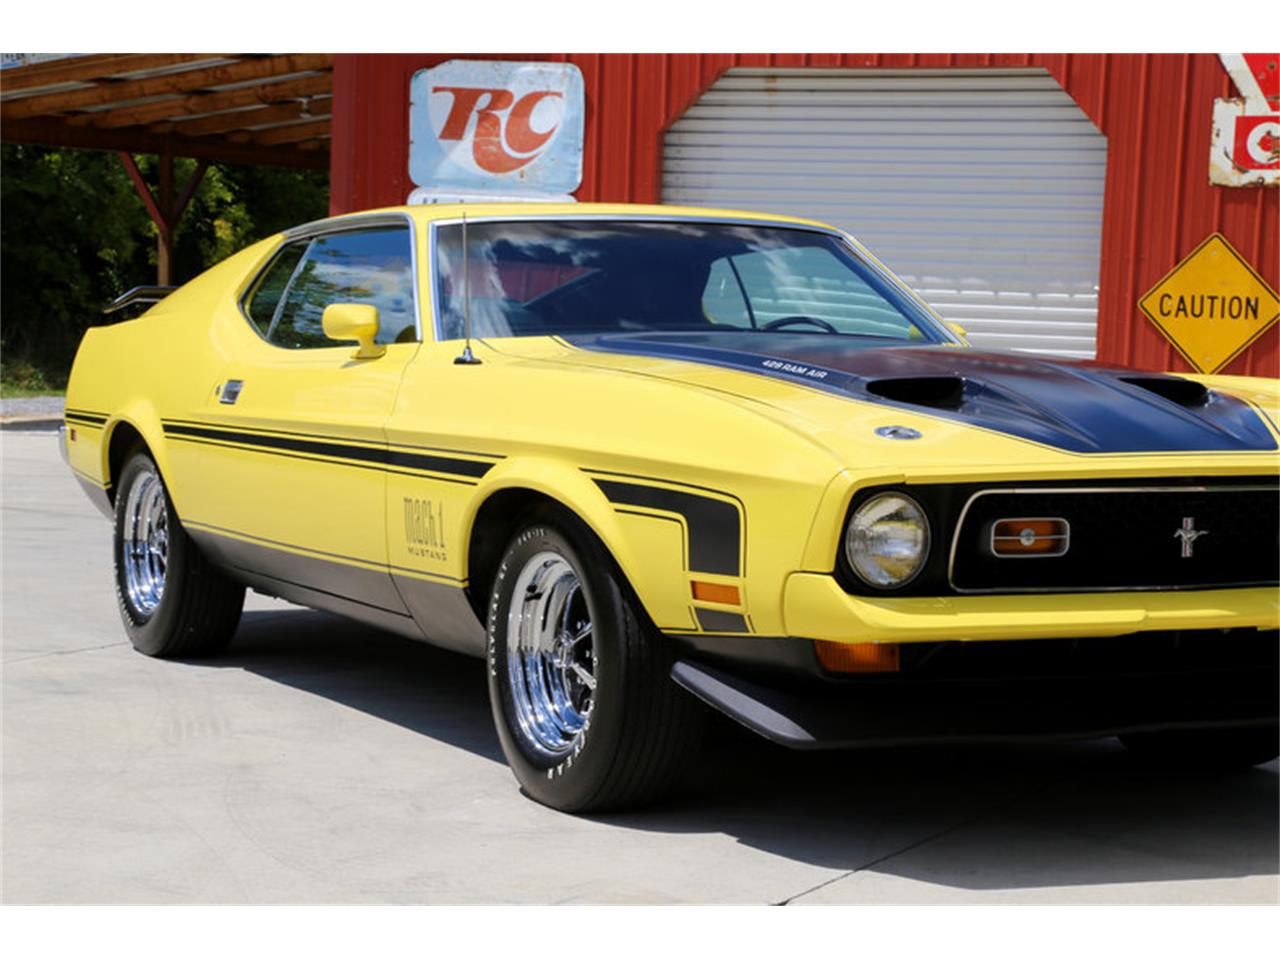 1971 Ford Mustang 429 Cobra Jet for Sale | ClassicCars.com | CC-895554